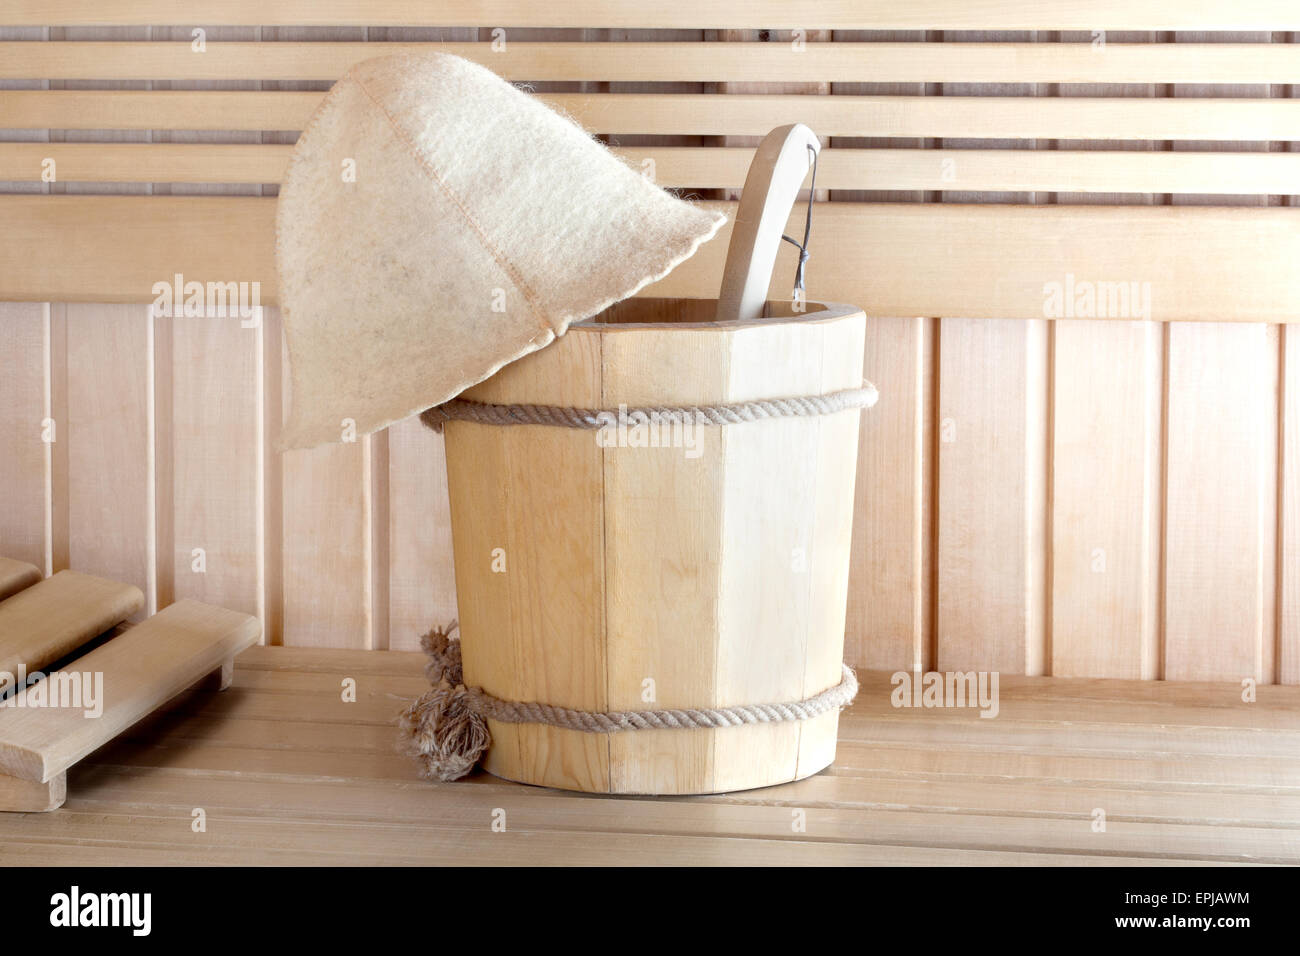 Traditional wooden sauna for relaxation with bucket of water Stock Photo